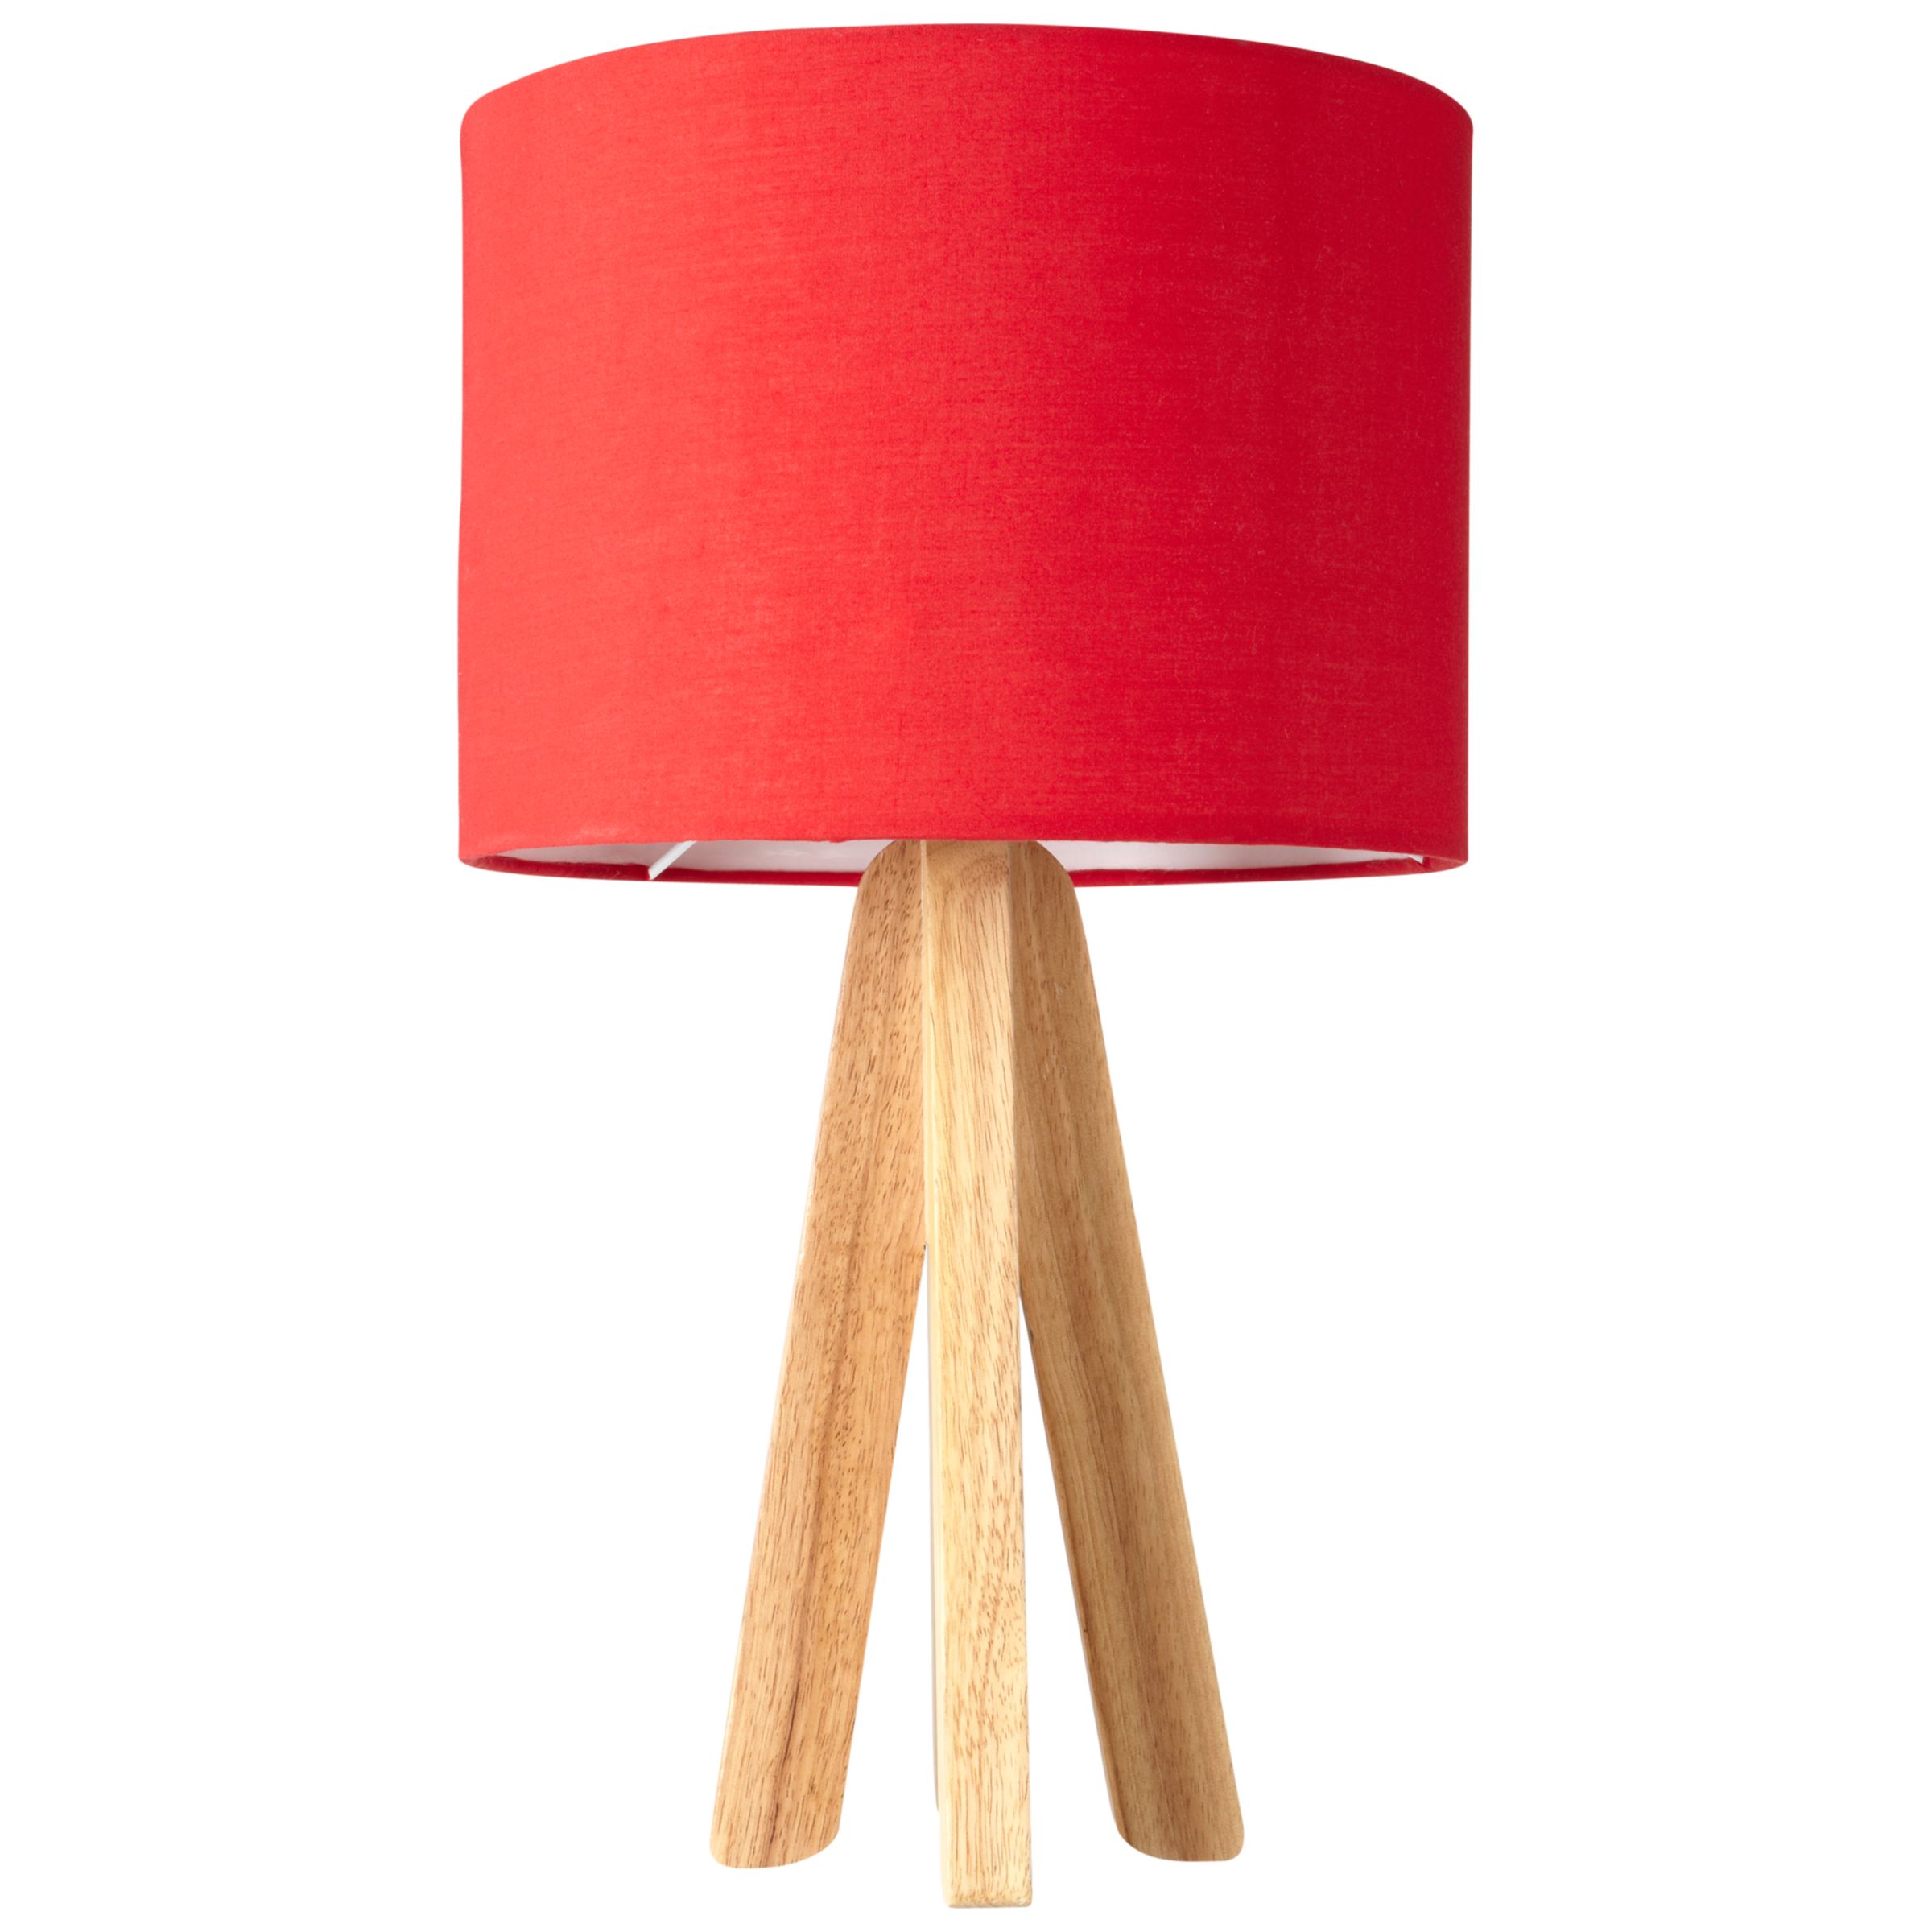 Kylie Table Lamp, Red